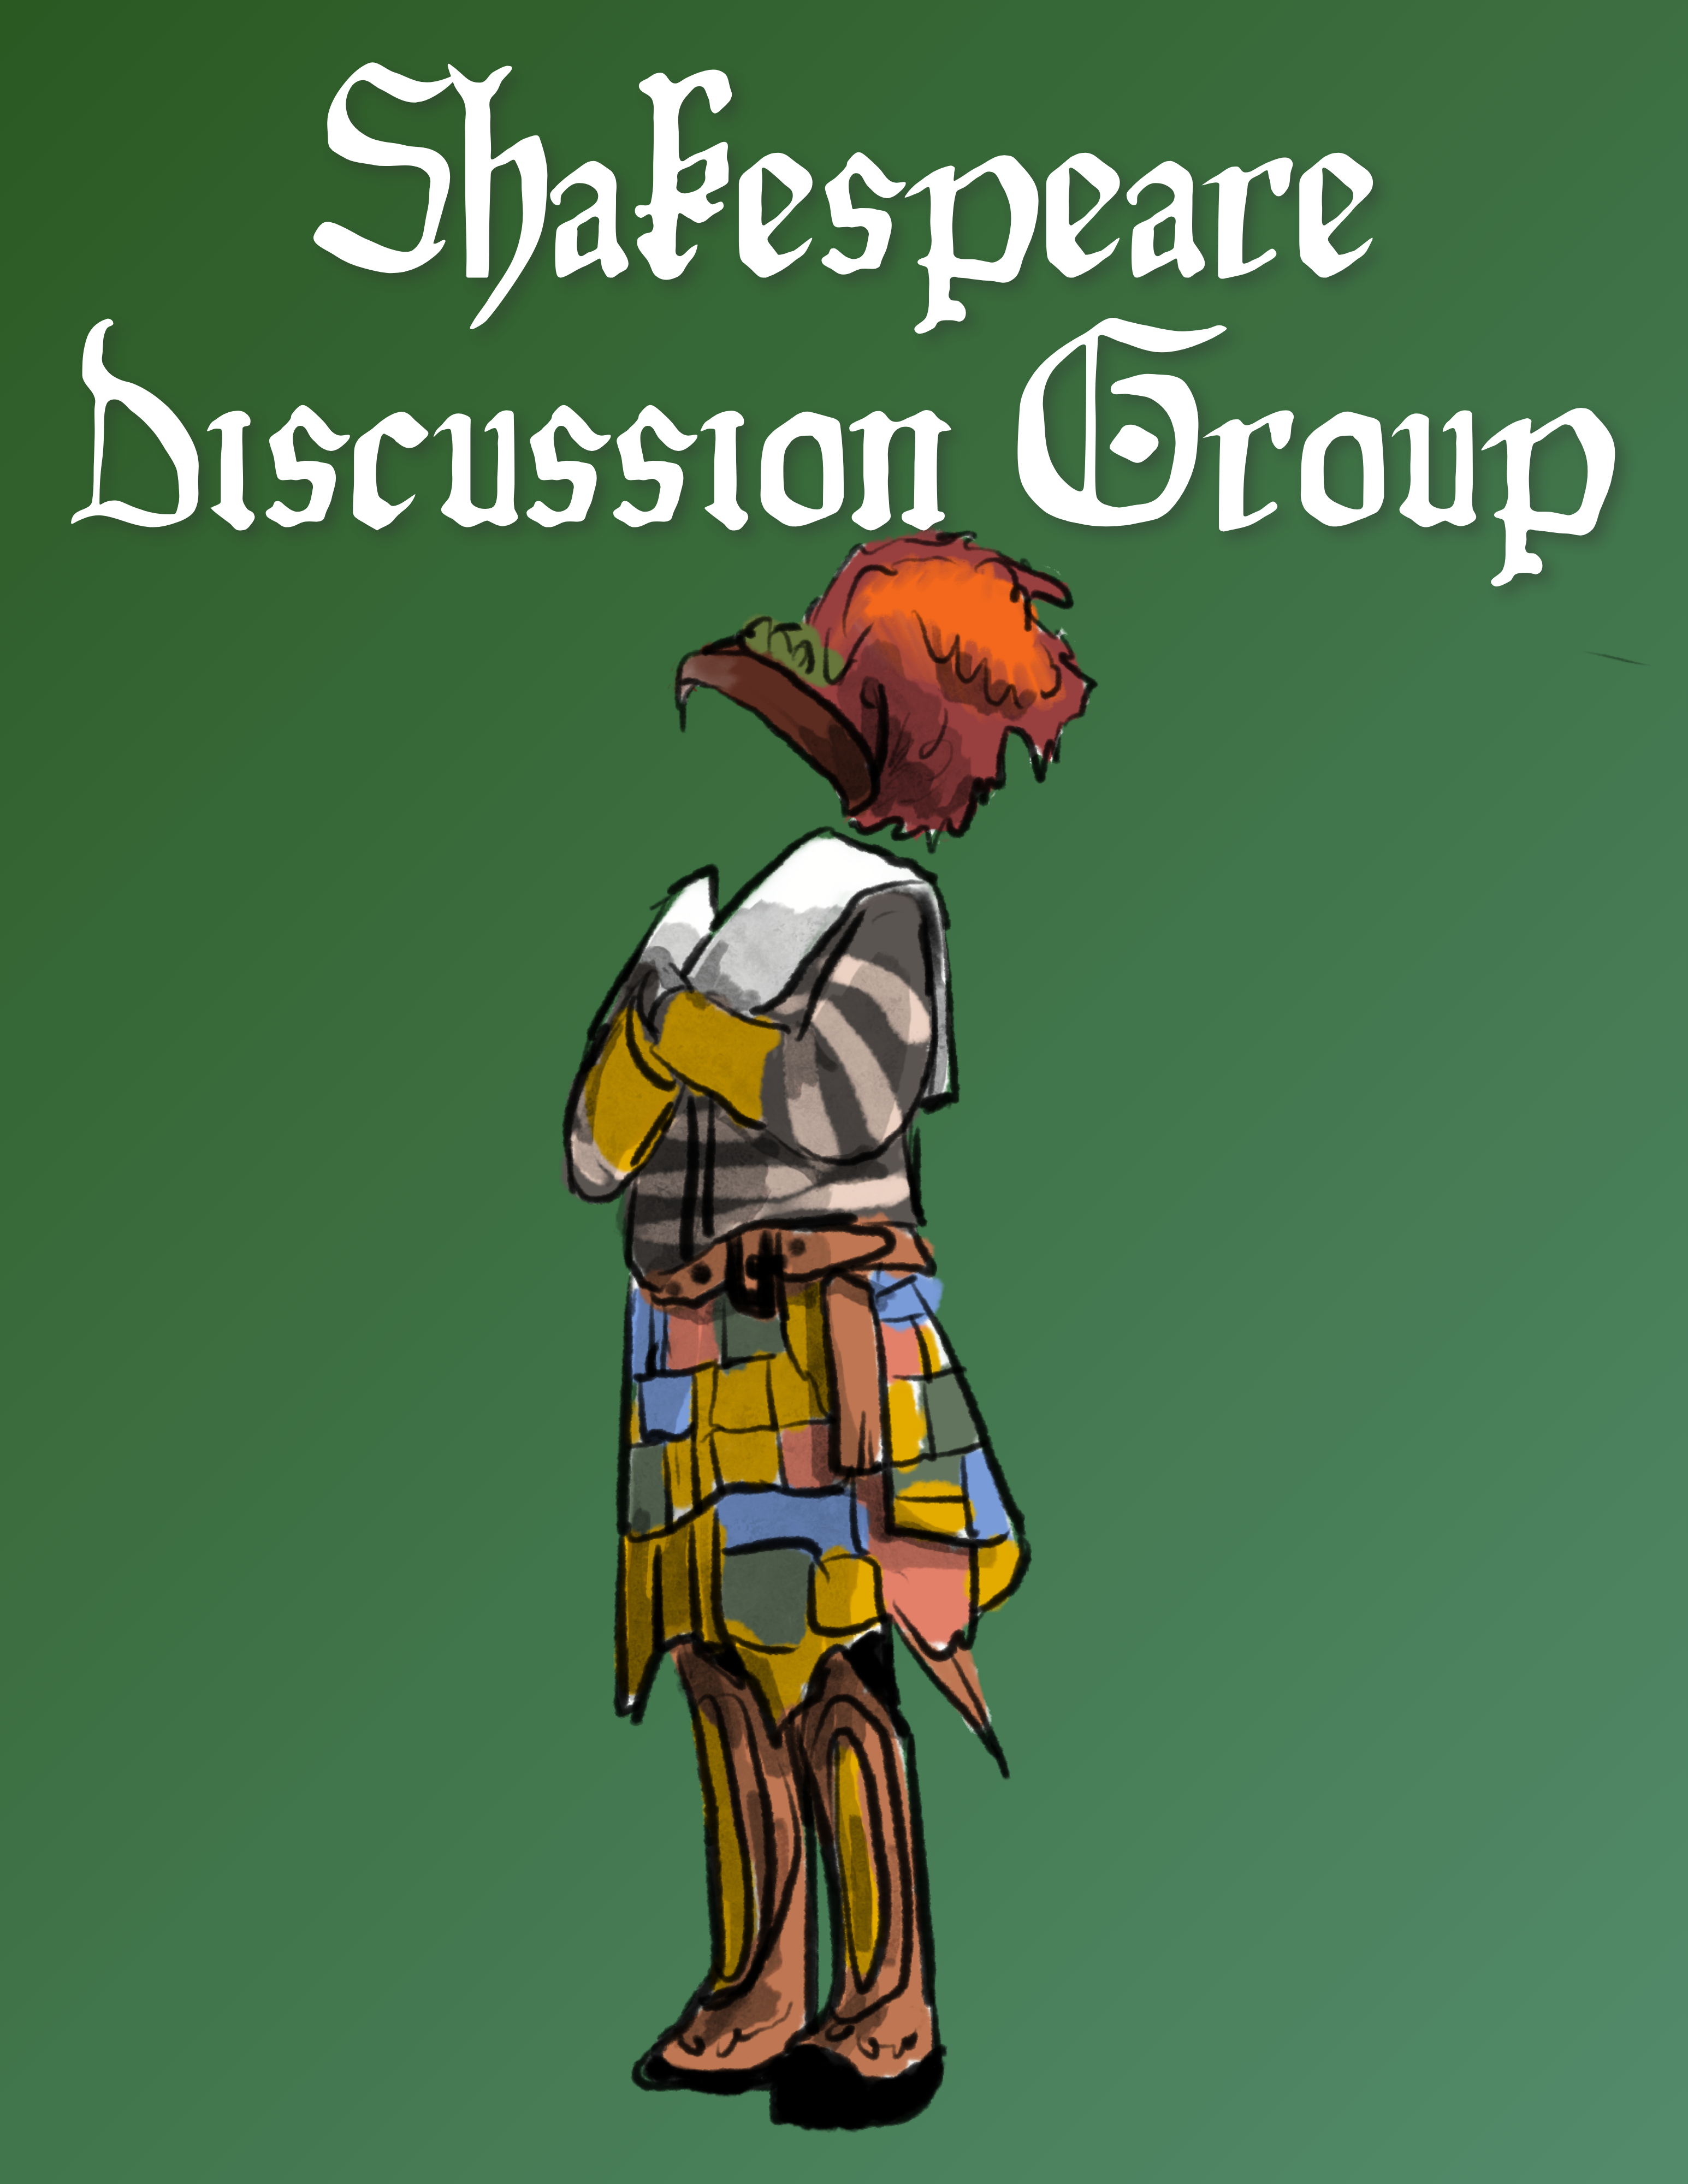 Shakespeare Discussion Group Headless person with colorful suit standing up with green background